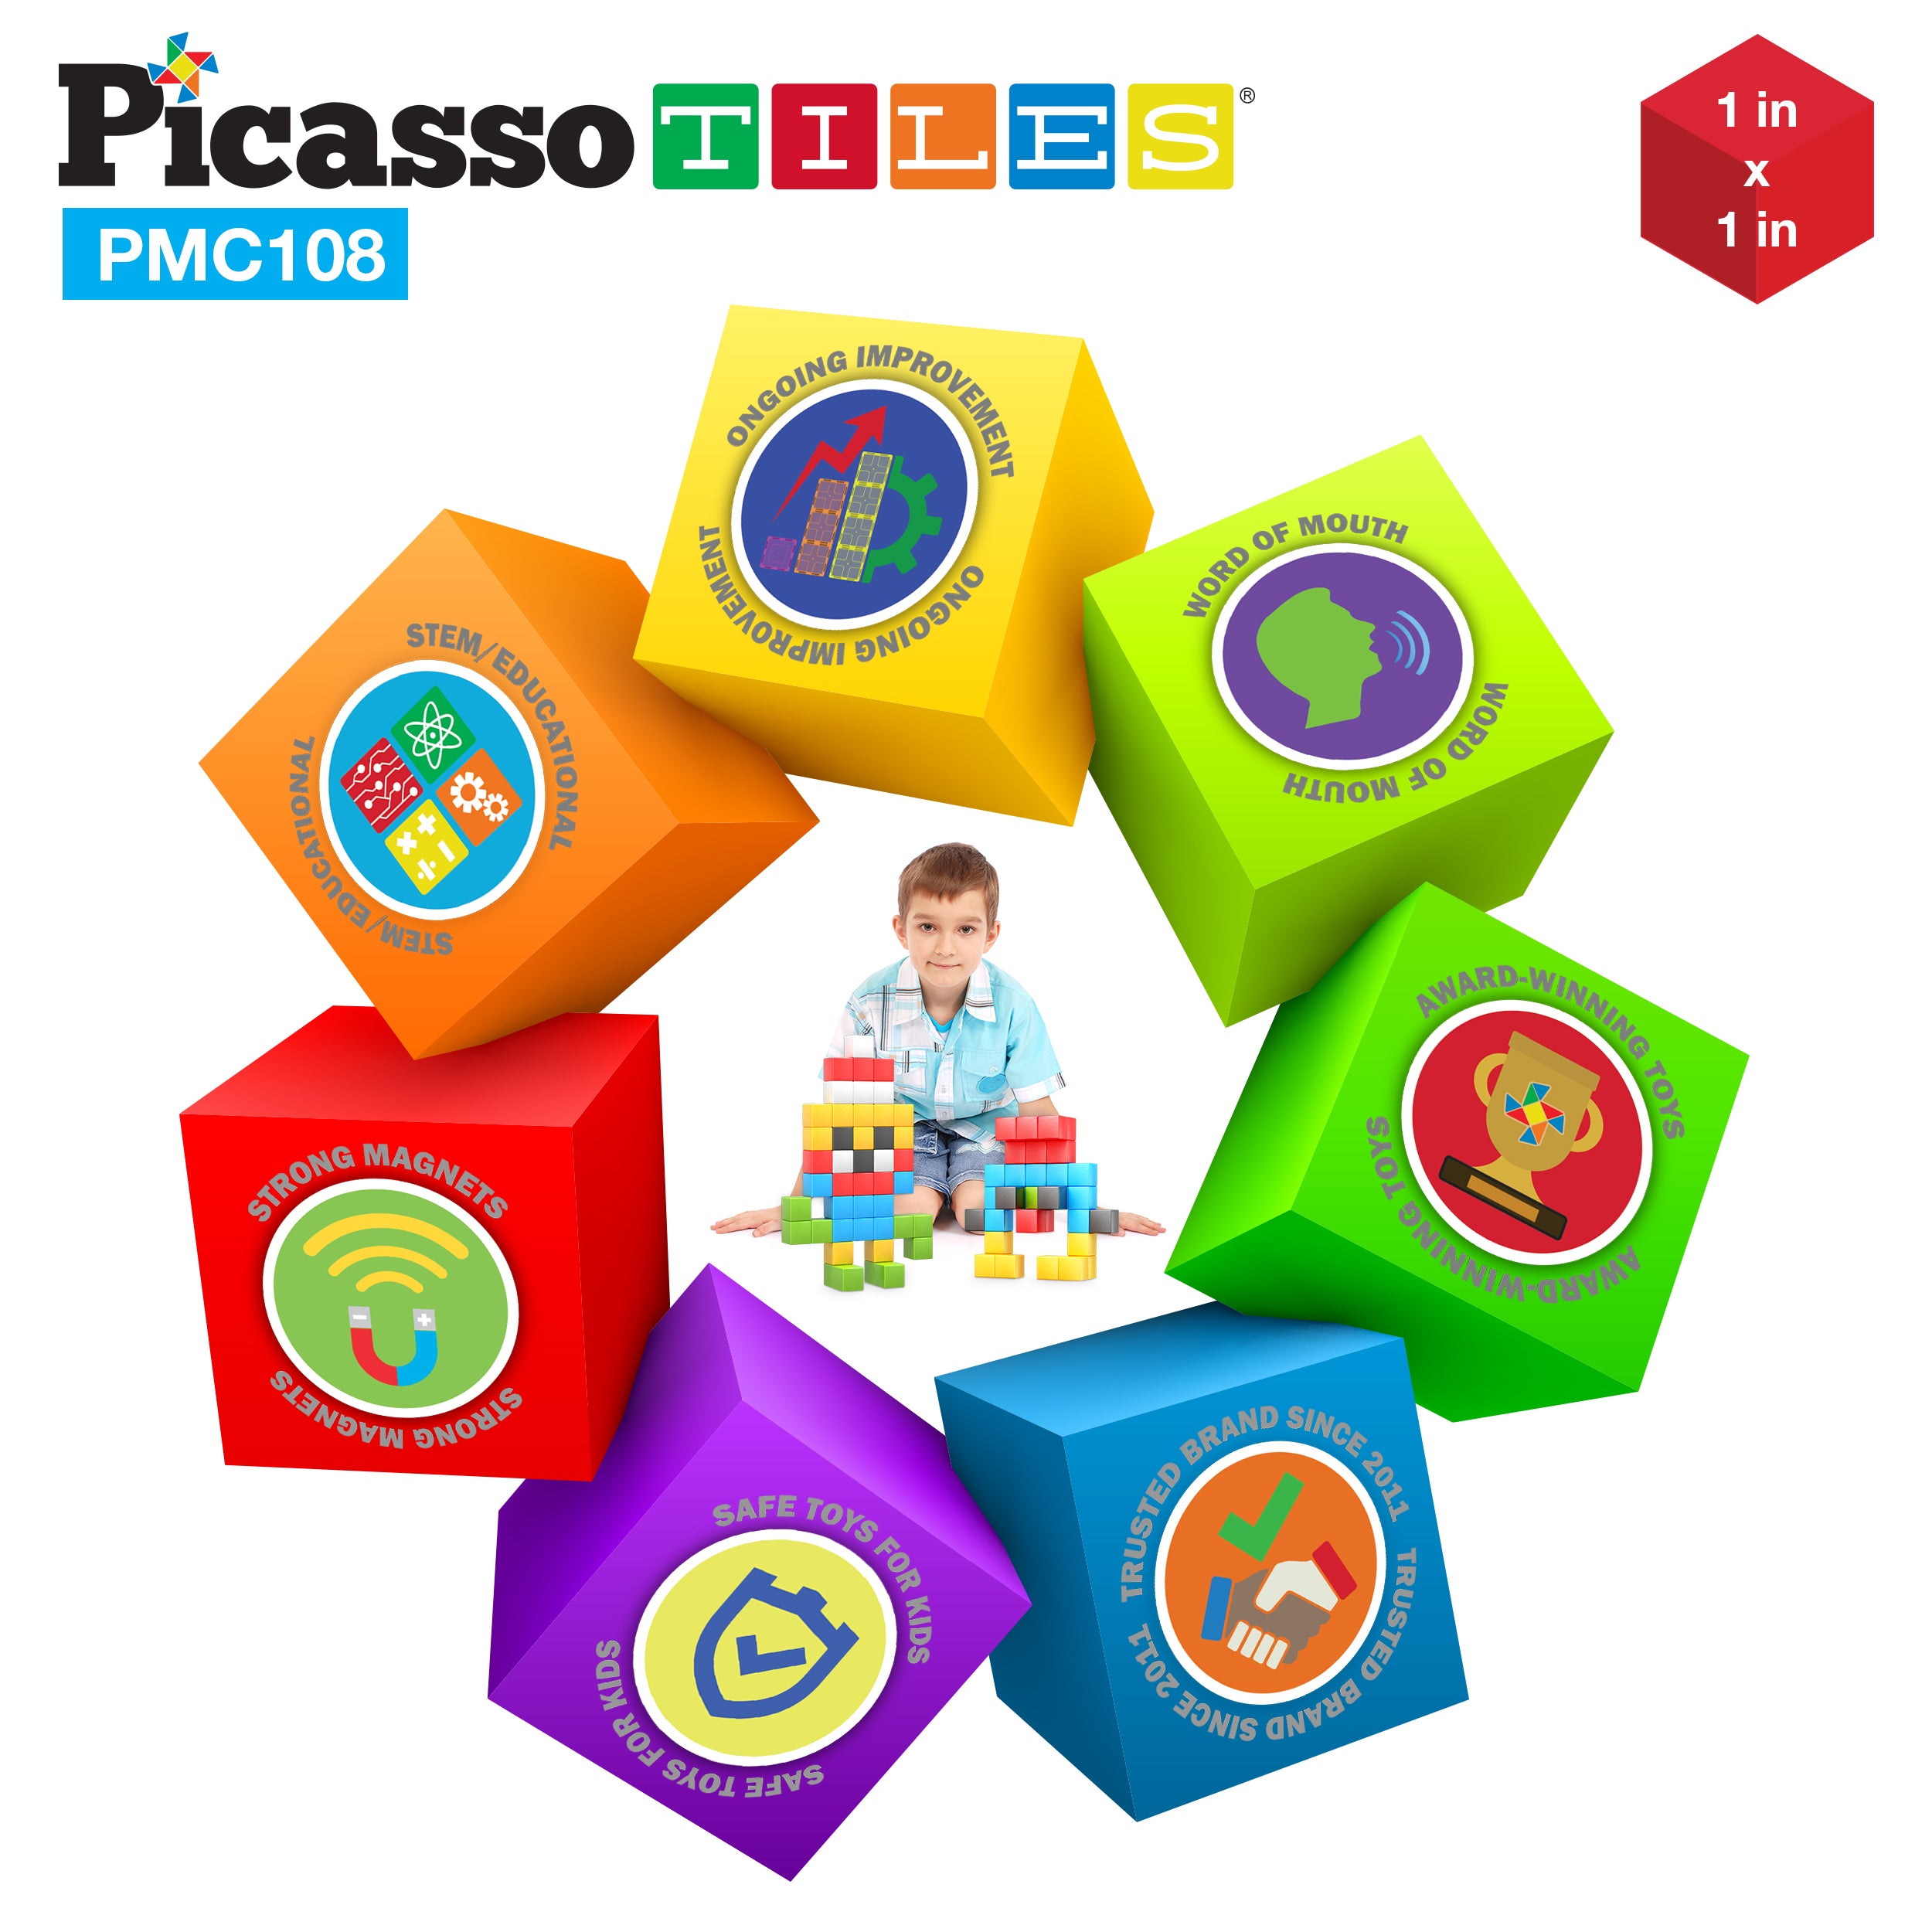 PicassoTiles Magnetic Puzzle Cubes 108 Pieces PMC108 with FREE Ideabook